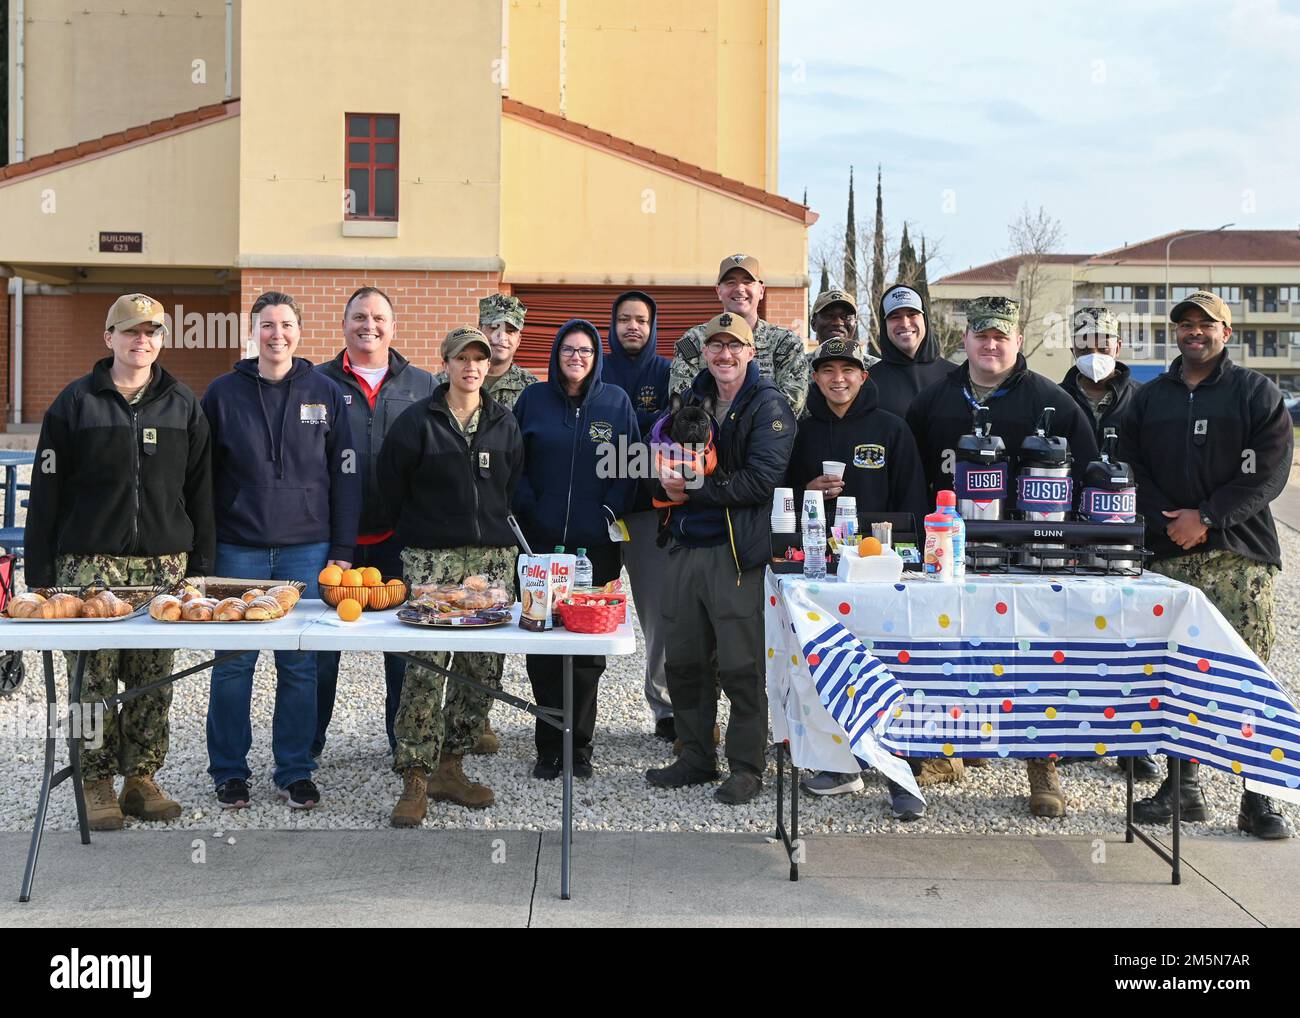 220329-N-GK686-1131 NAVAL AIR STATION SIGONELLA, Italy (Mar. 29, 2022)—U.S. Navy chiefs and USO employees pose for a group photo after handing out breakfast to service members in honor of the upcoming Chief’s Birthday on Naval Air Station Sigonella, Mar. 29, 2022. NAS Sigonella’s strategic location enables U.S., allied, and partner nation forces to deploy and respond as required, ensuring security and stability in Europe, Africa and Central Command. Stock Photo